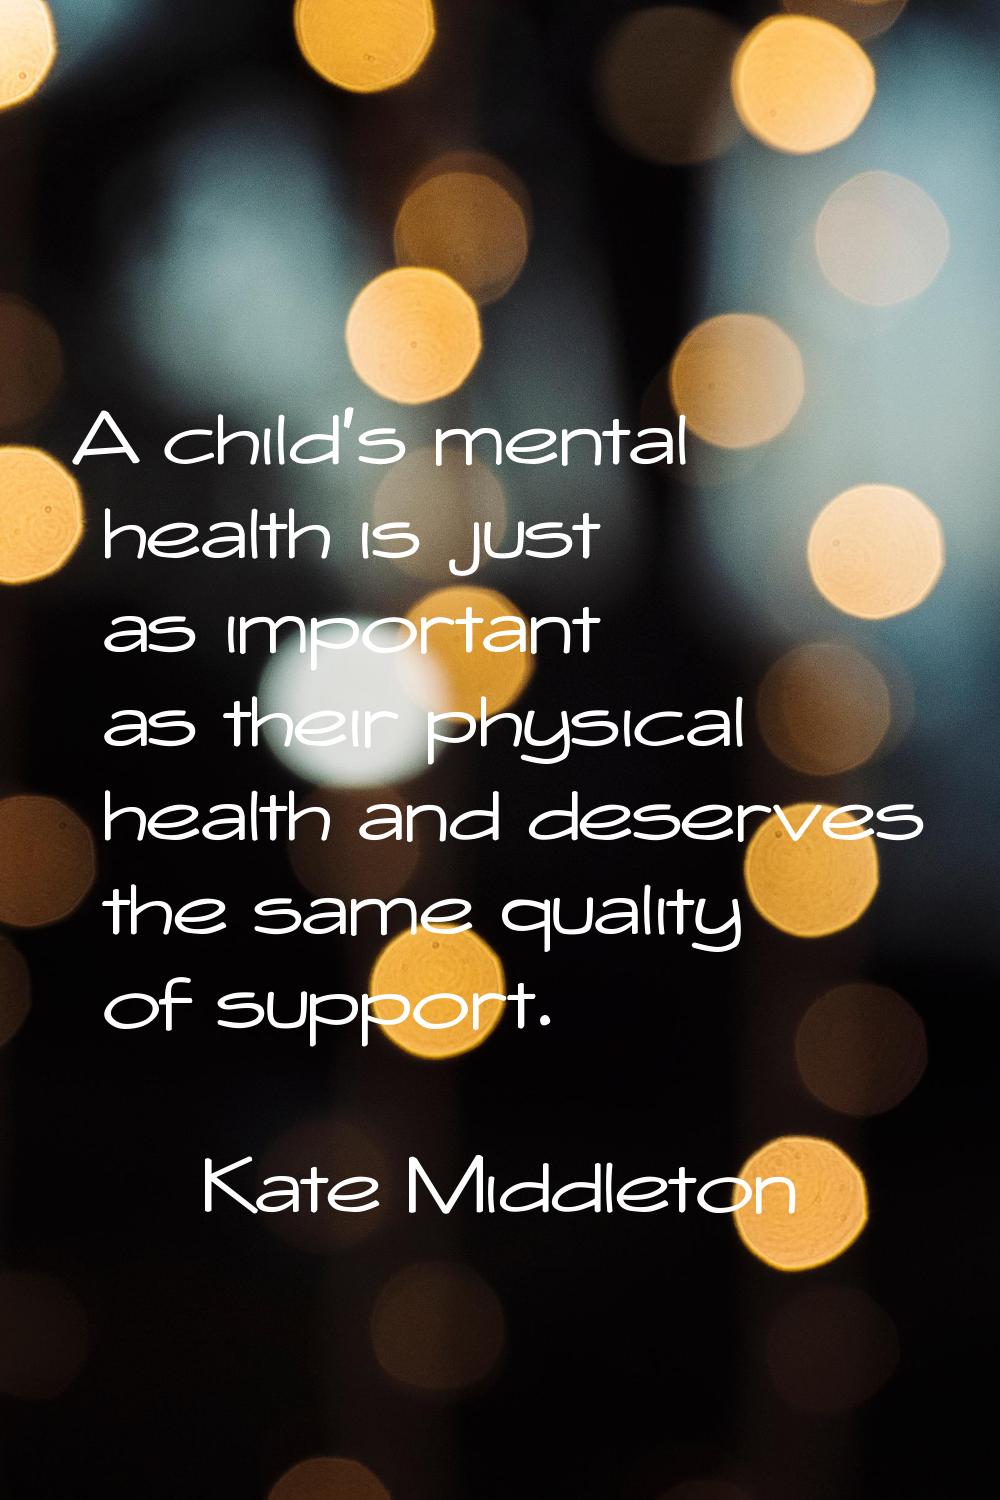 A child's mental health is just as important as their physical health and deserves the same quality